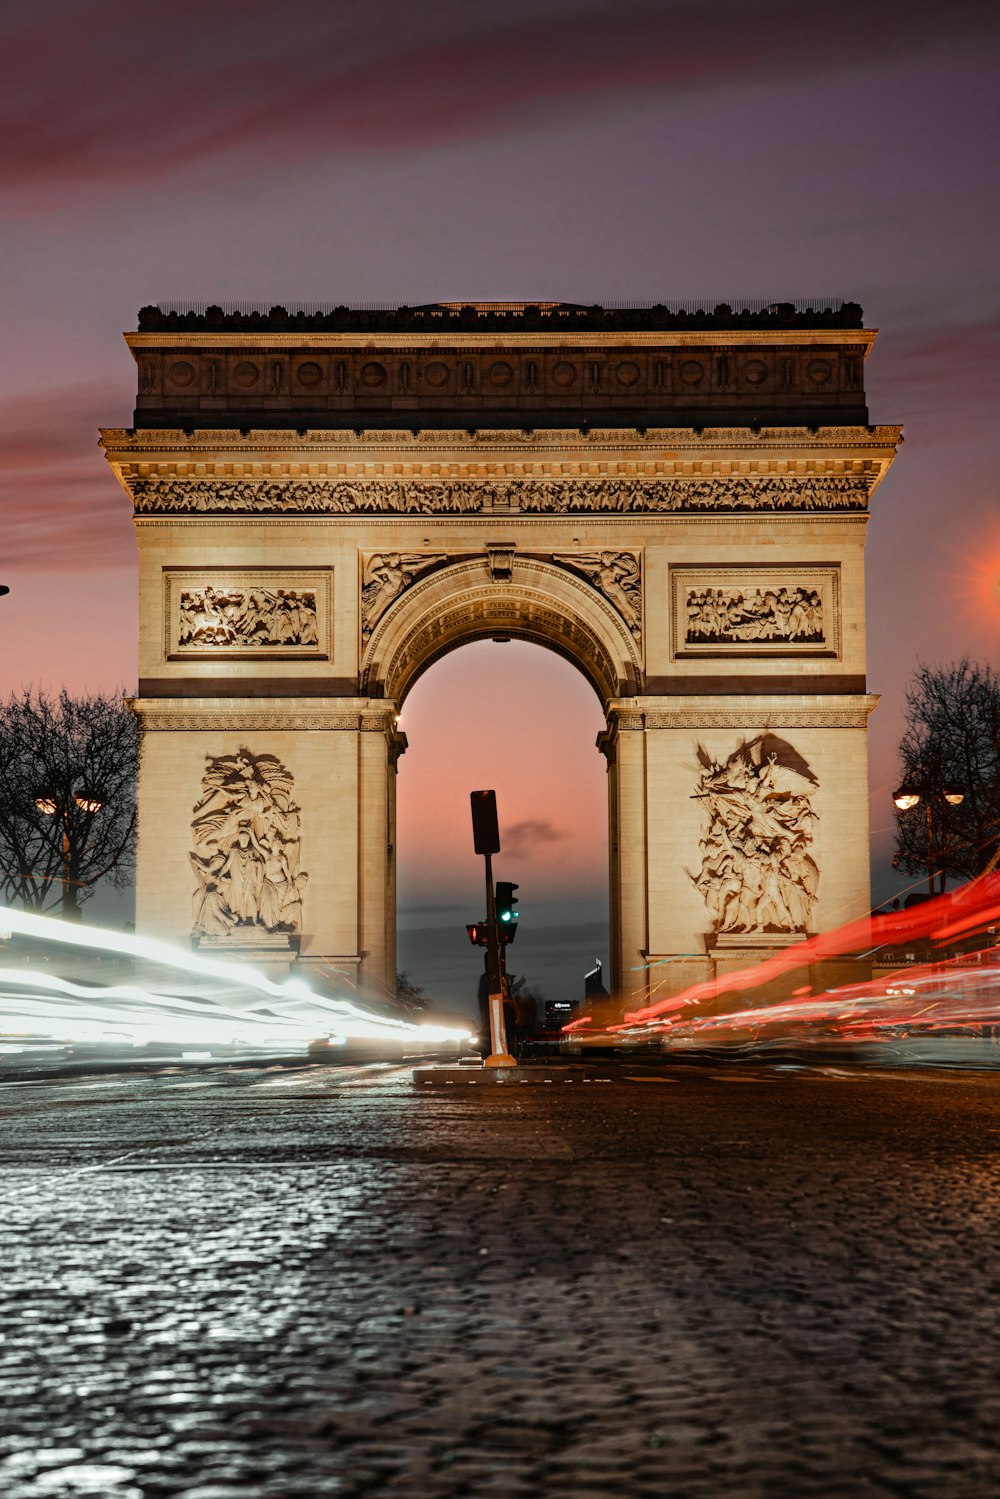 the arc of triumph is lit up at night